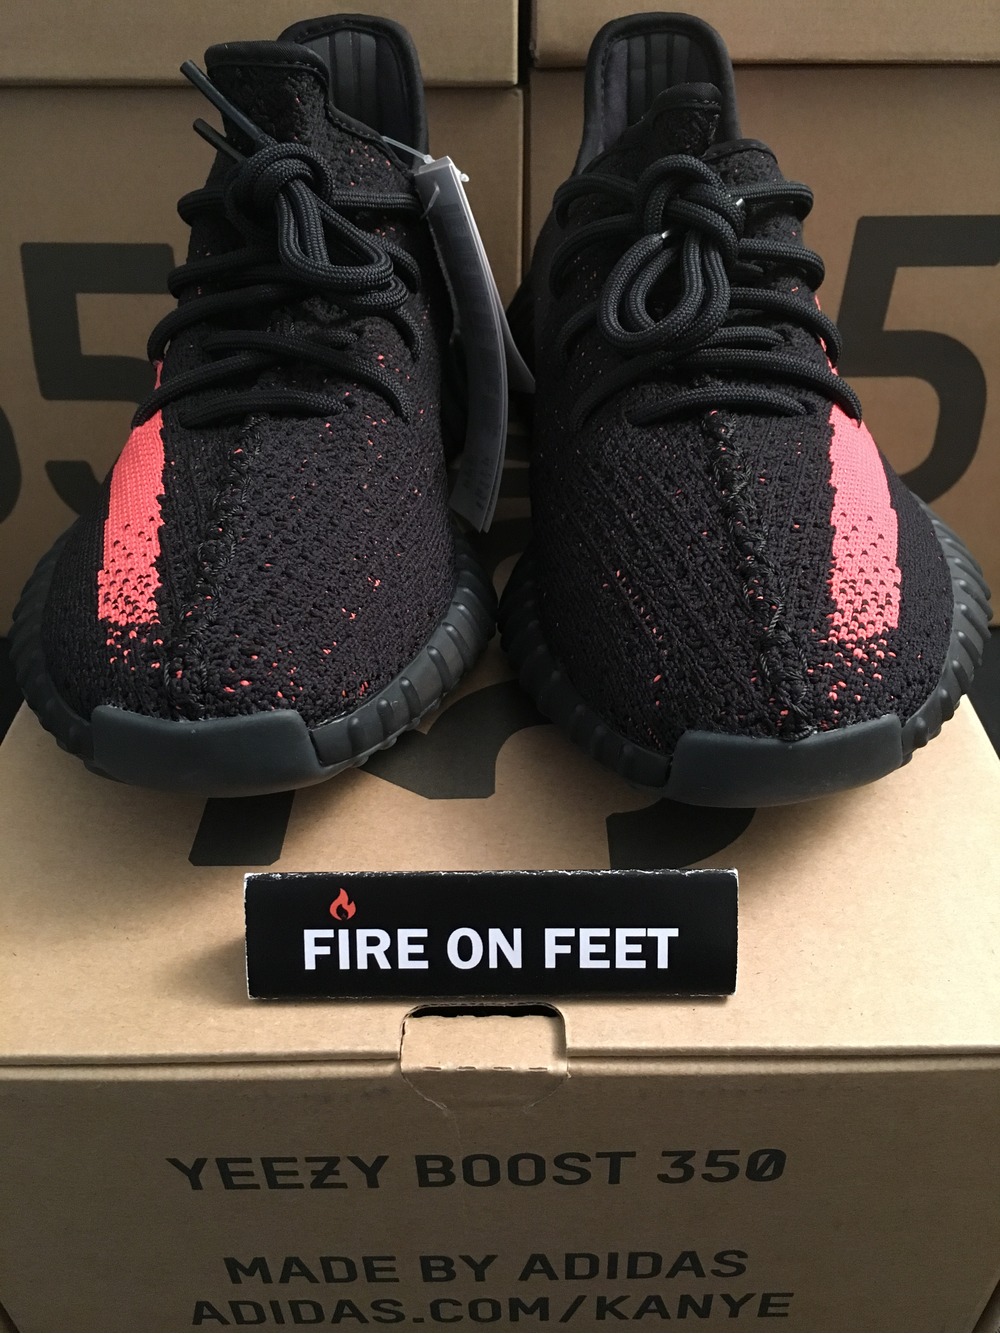 Authentic Version Check Yeezy Boost 350 V2 Black Bred